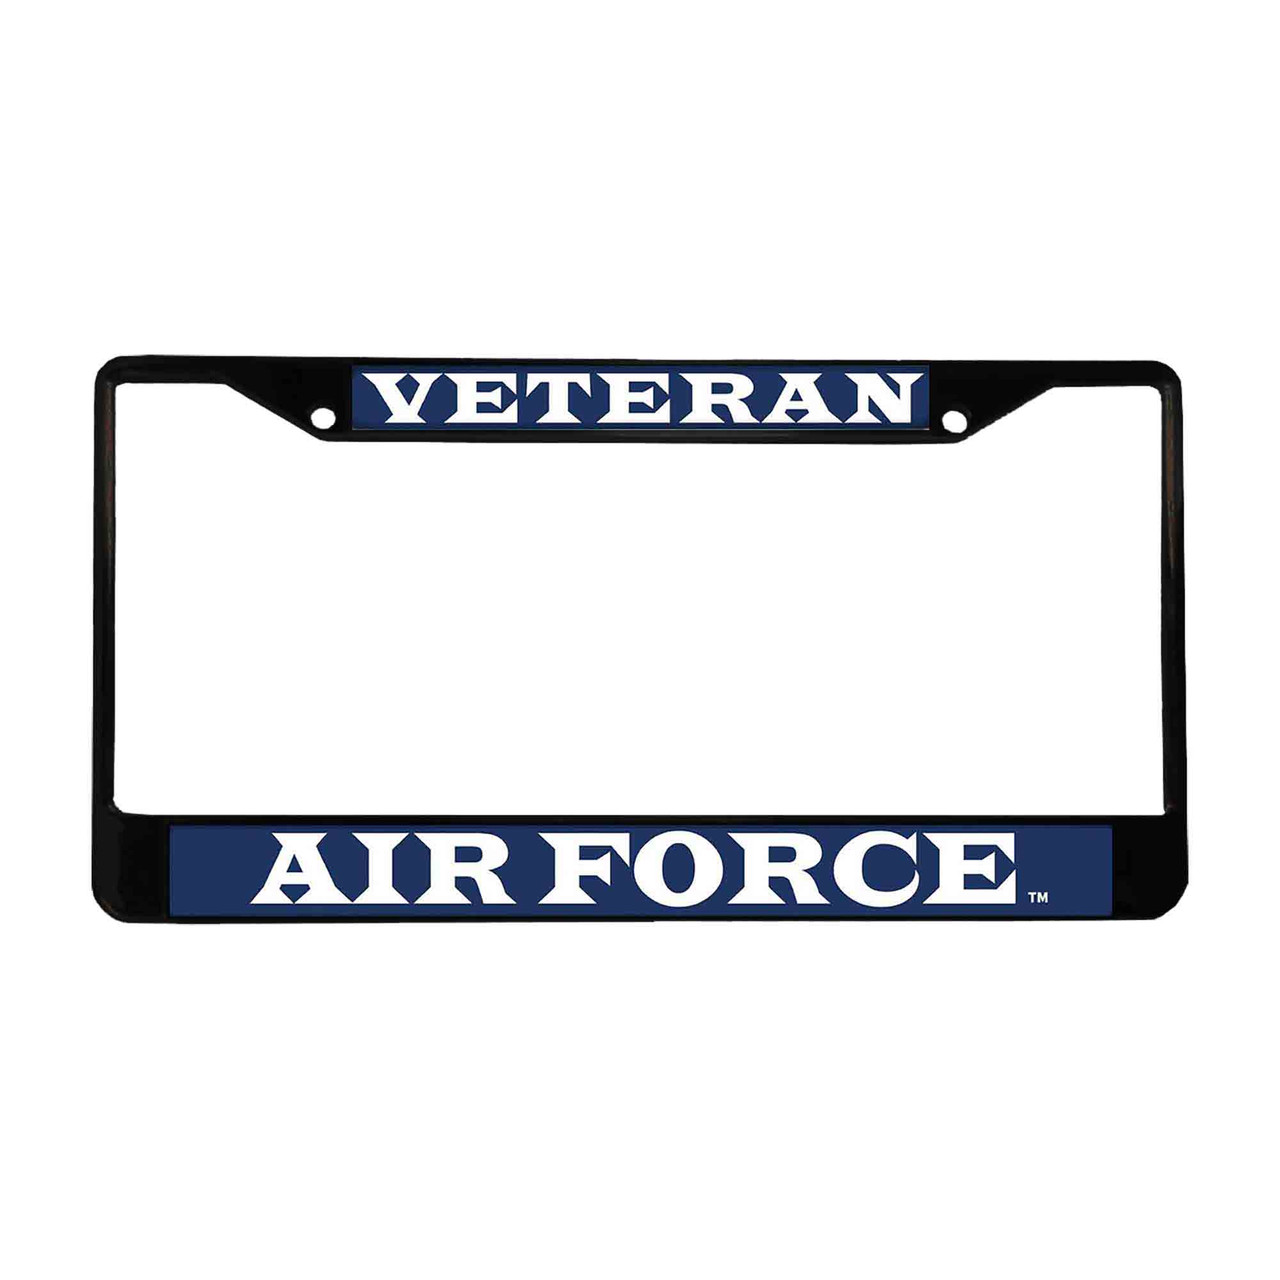 air force veteran powder coated license plate frame - front view